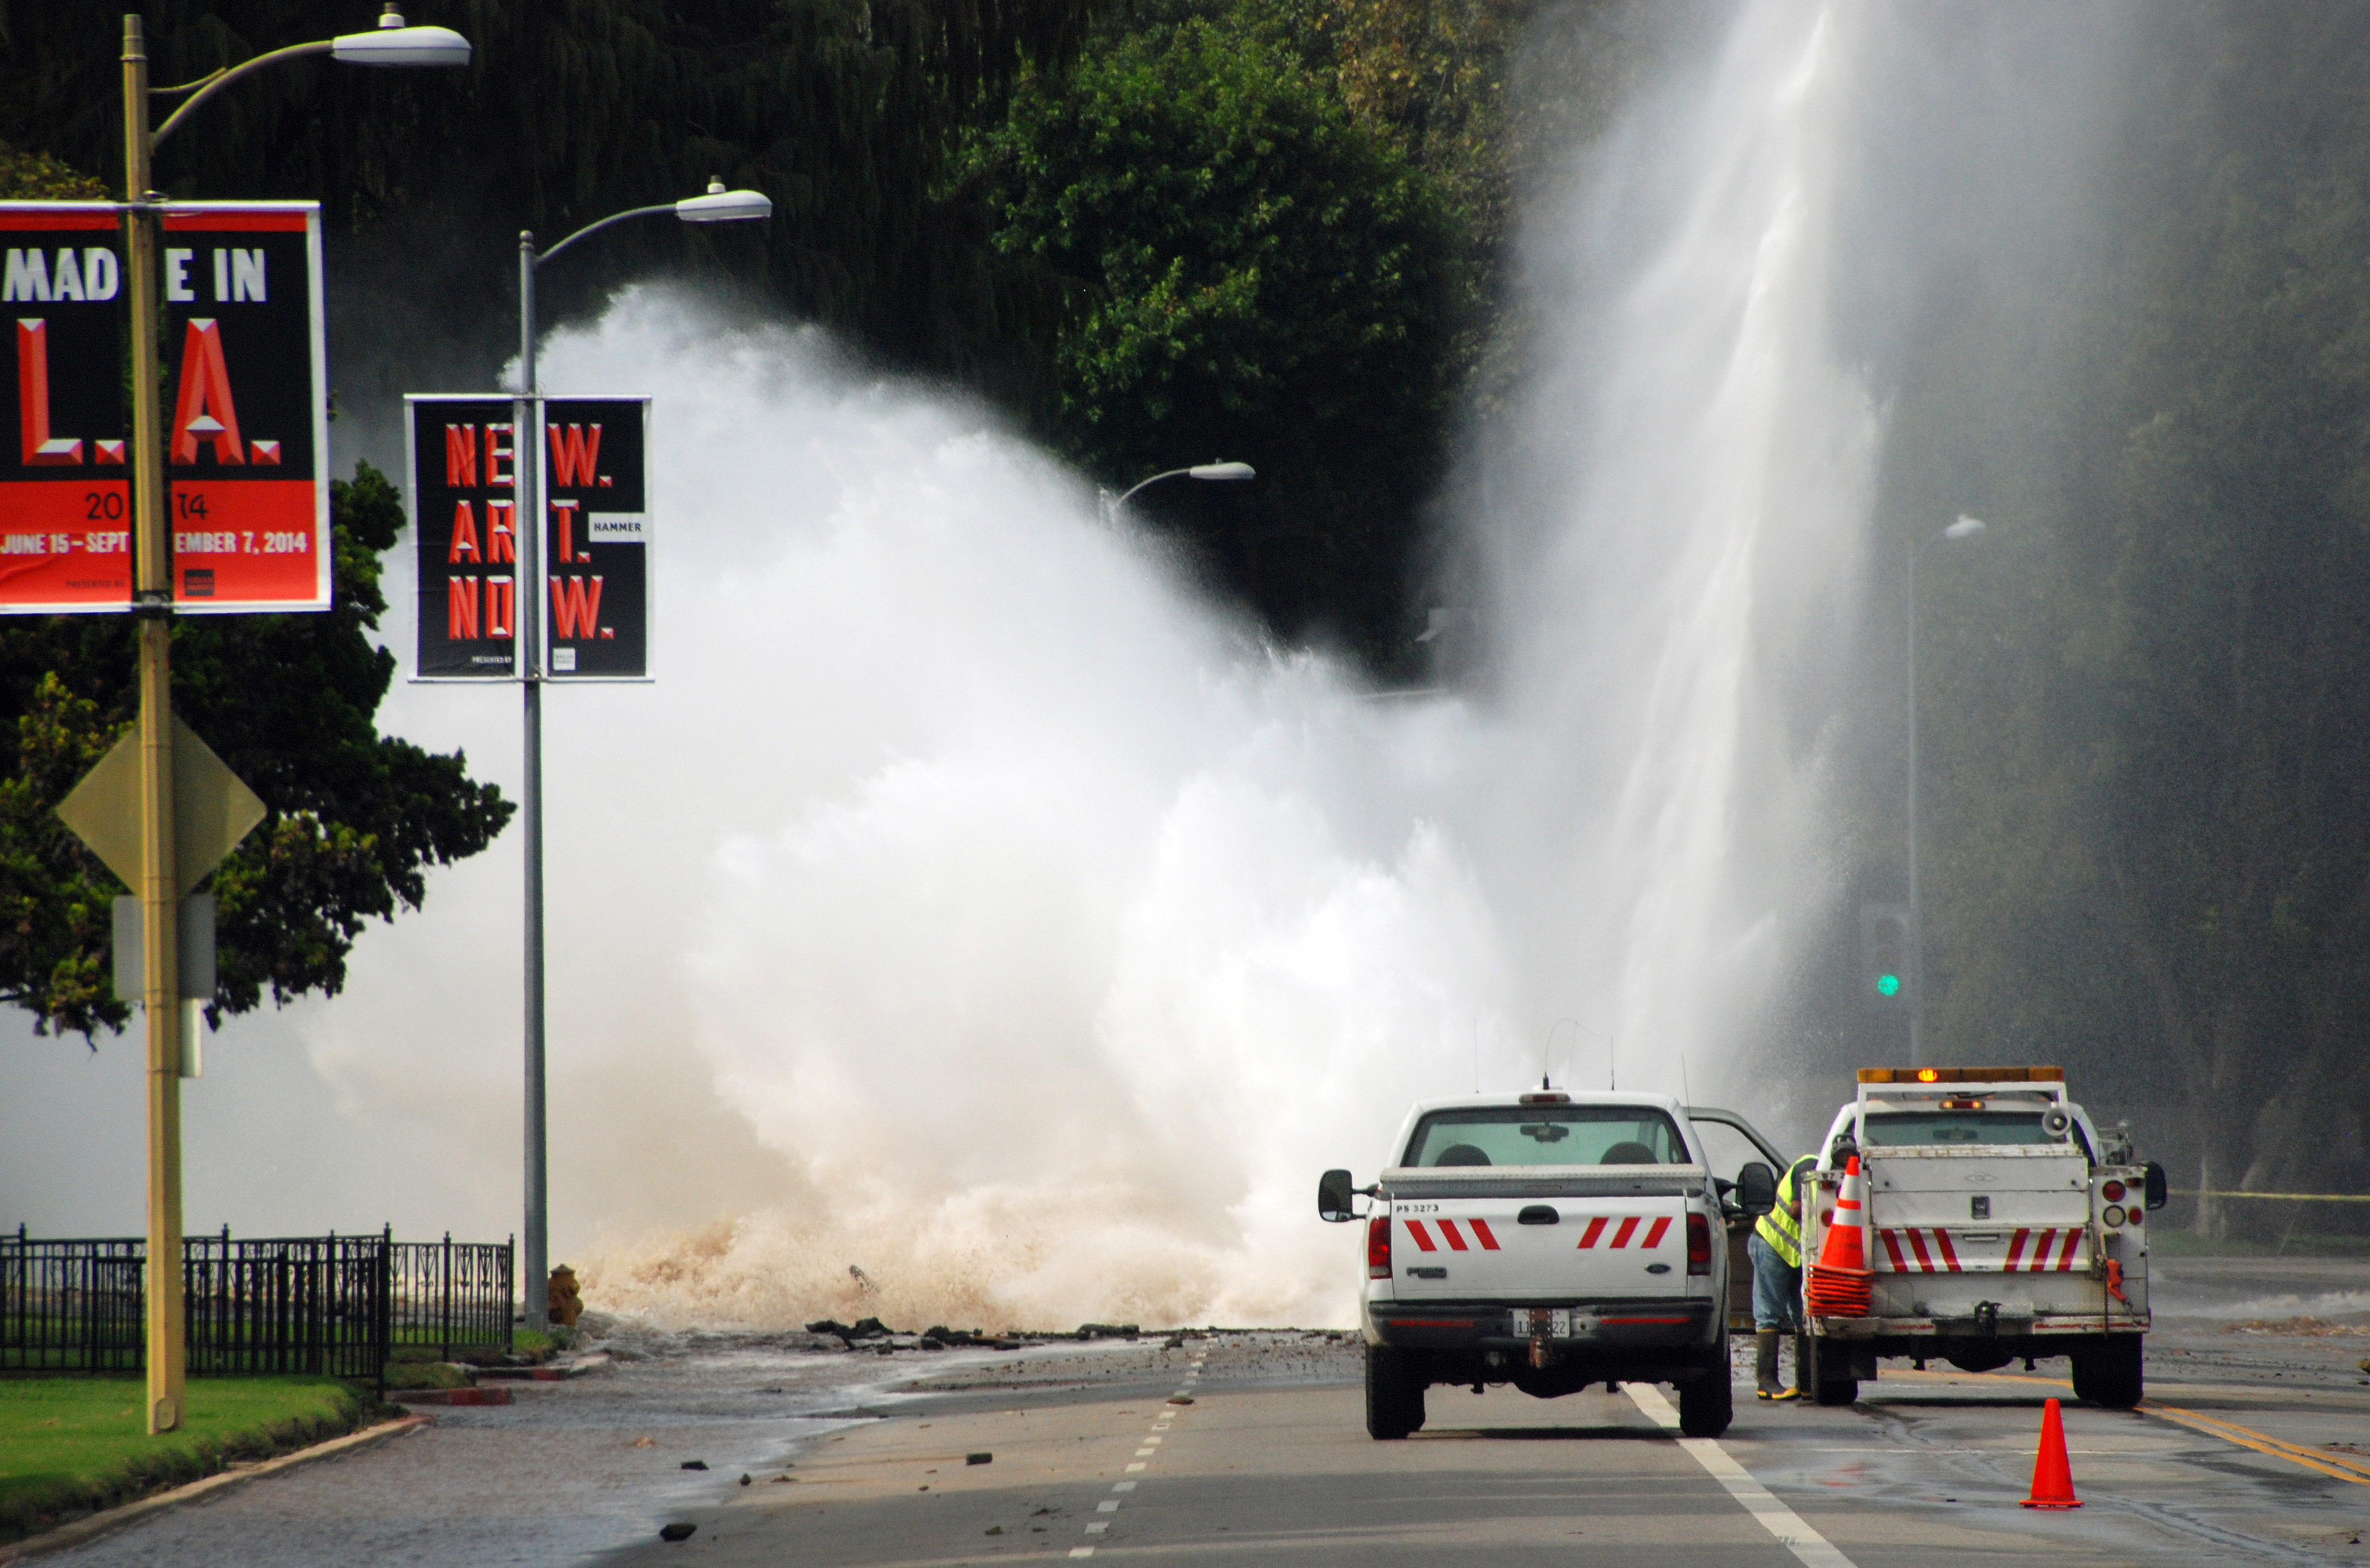 Water shoots in the air from a broken 30-inch water main under Sunset Boulevard, uphill from UCLA in the Westwood section of Los Angeles, Tuesday, July 29, 2014. The resulting flood inundated several areas of UCLA, including Pauley Pavilion, home of UCLA basketball, a parking structure and several other building. (AP Photo/Mike Meadows)